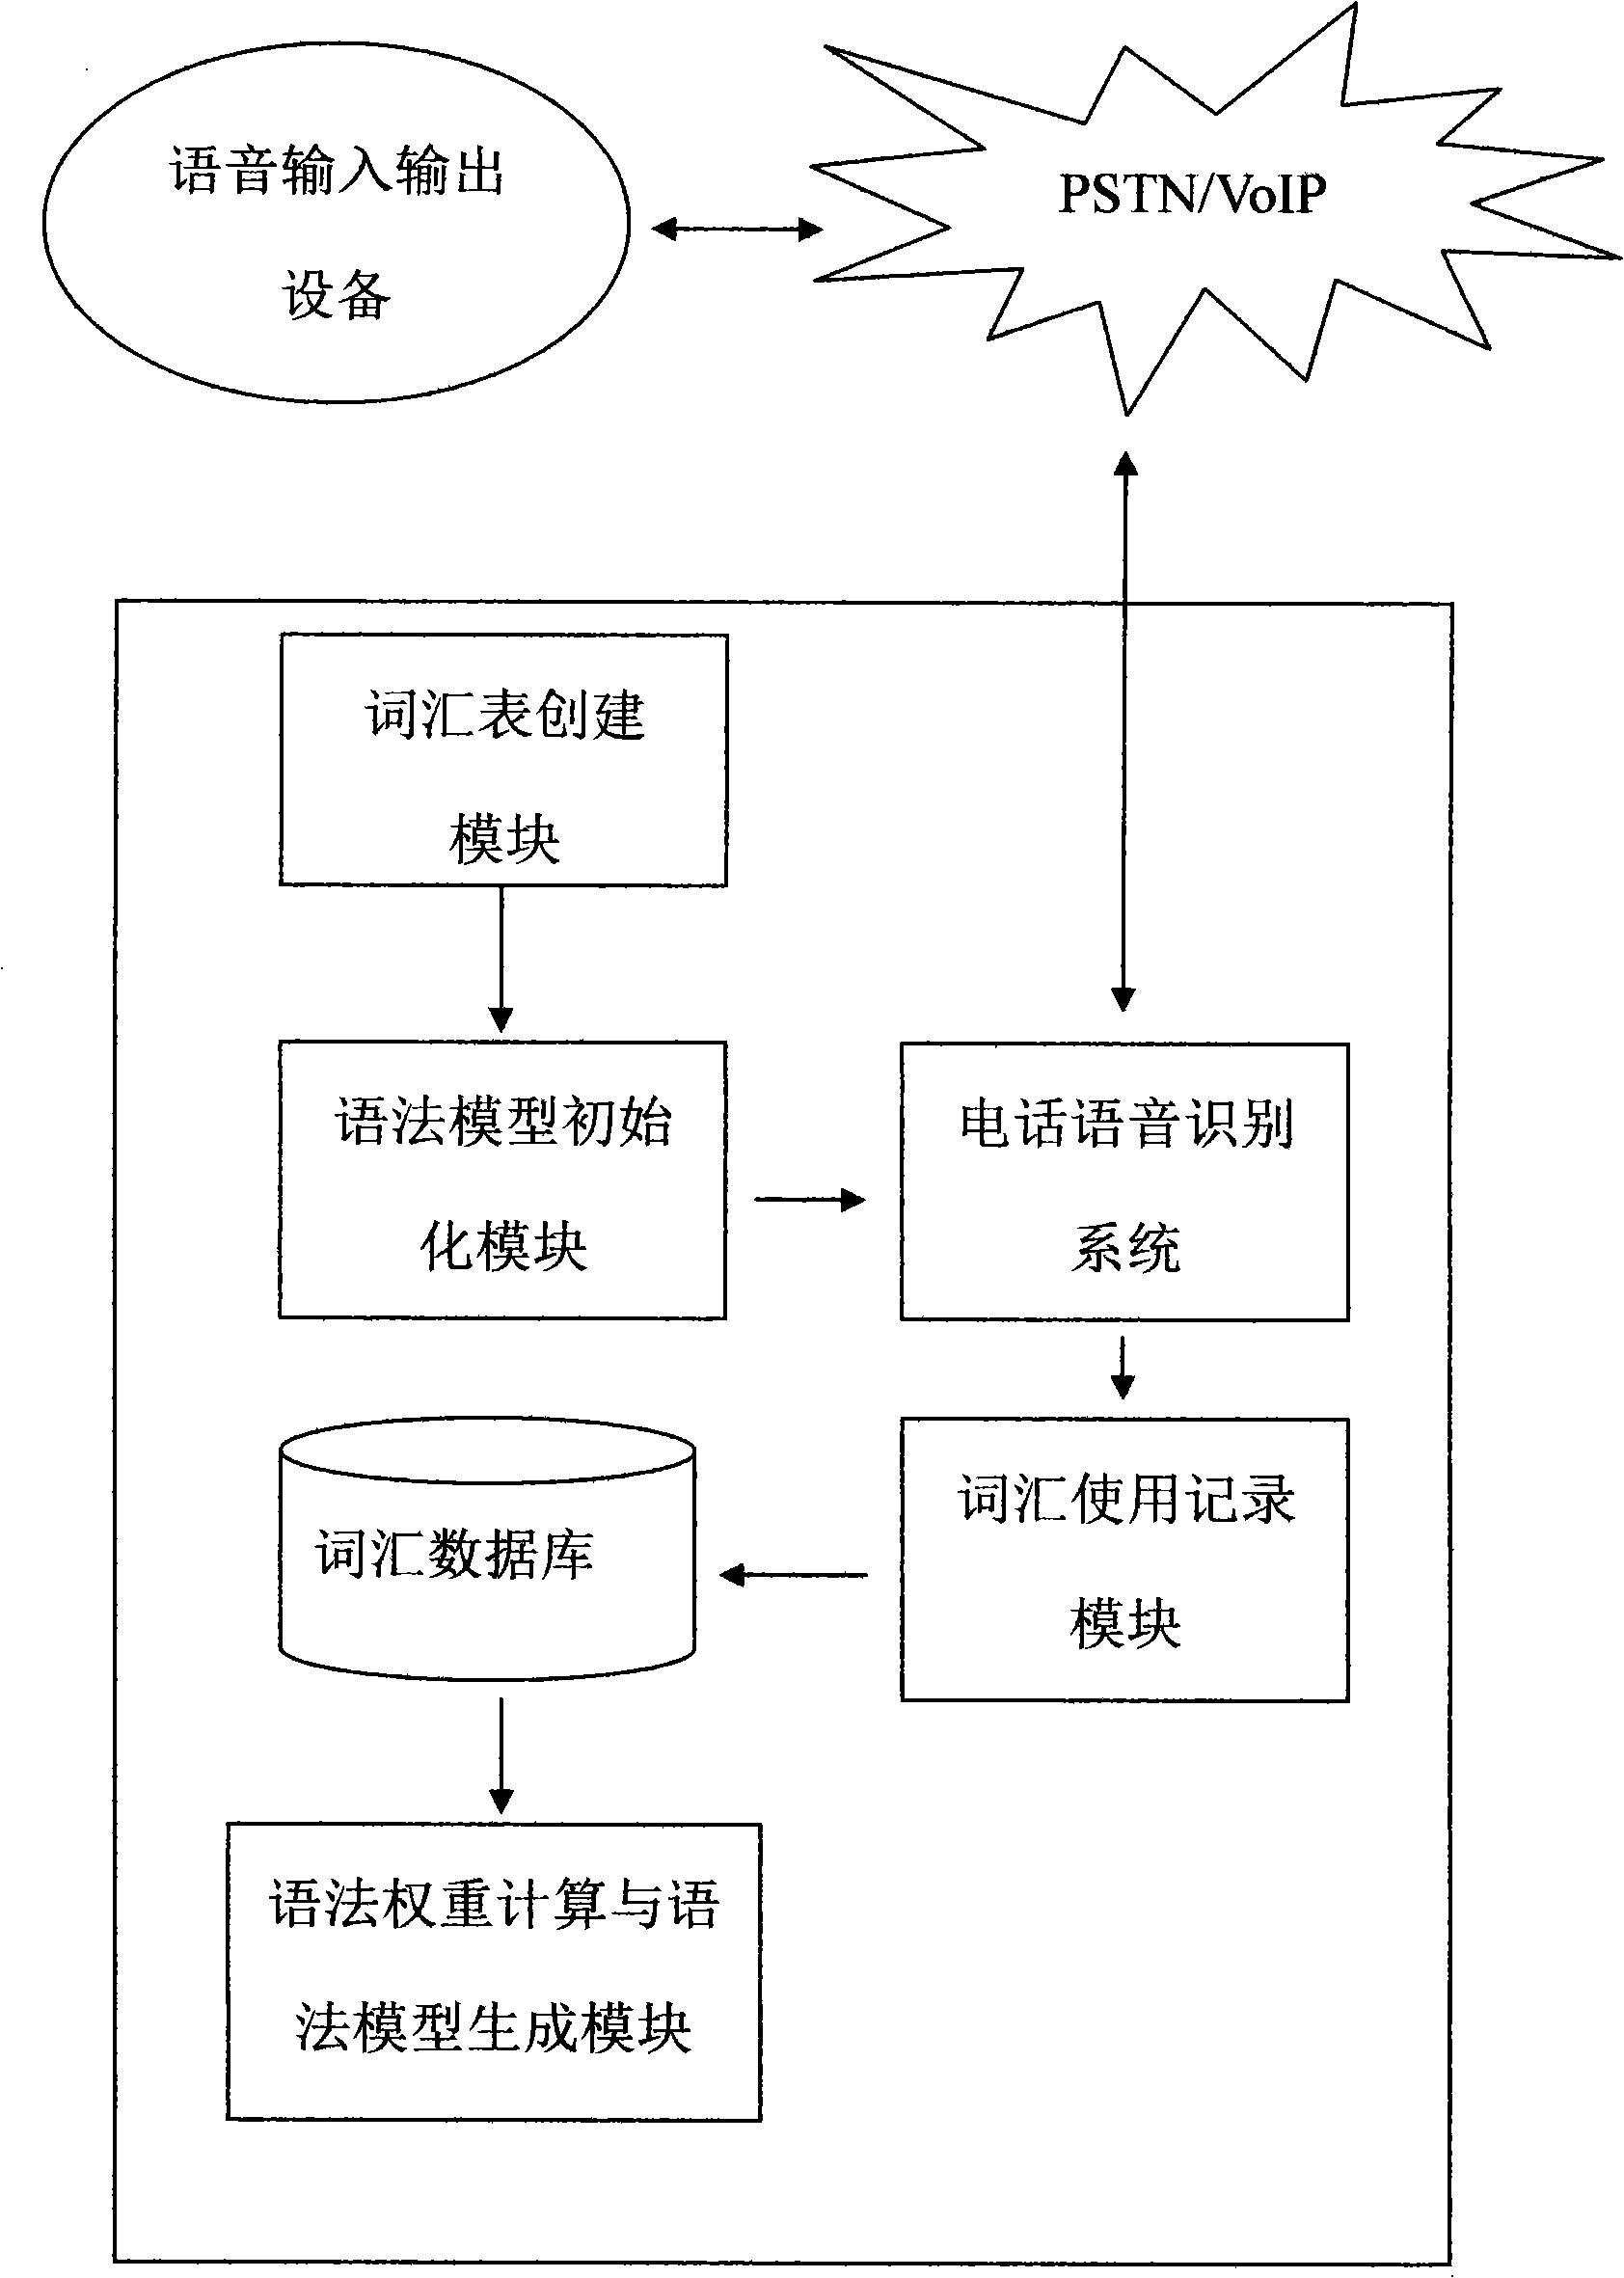 Speech recognition optimizing system aiming at locale language use preference and method thereof